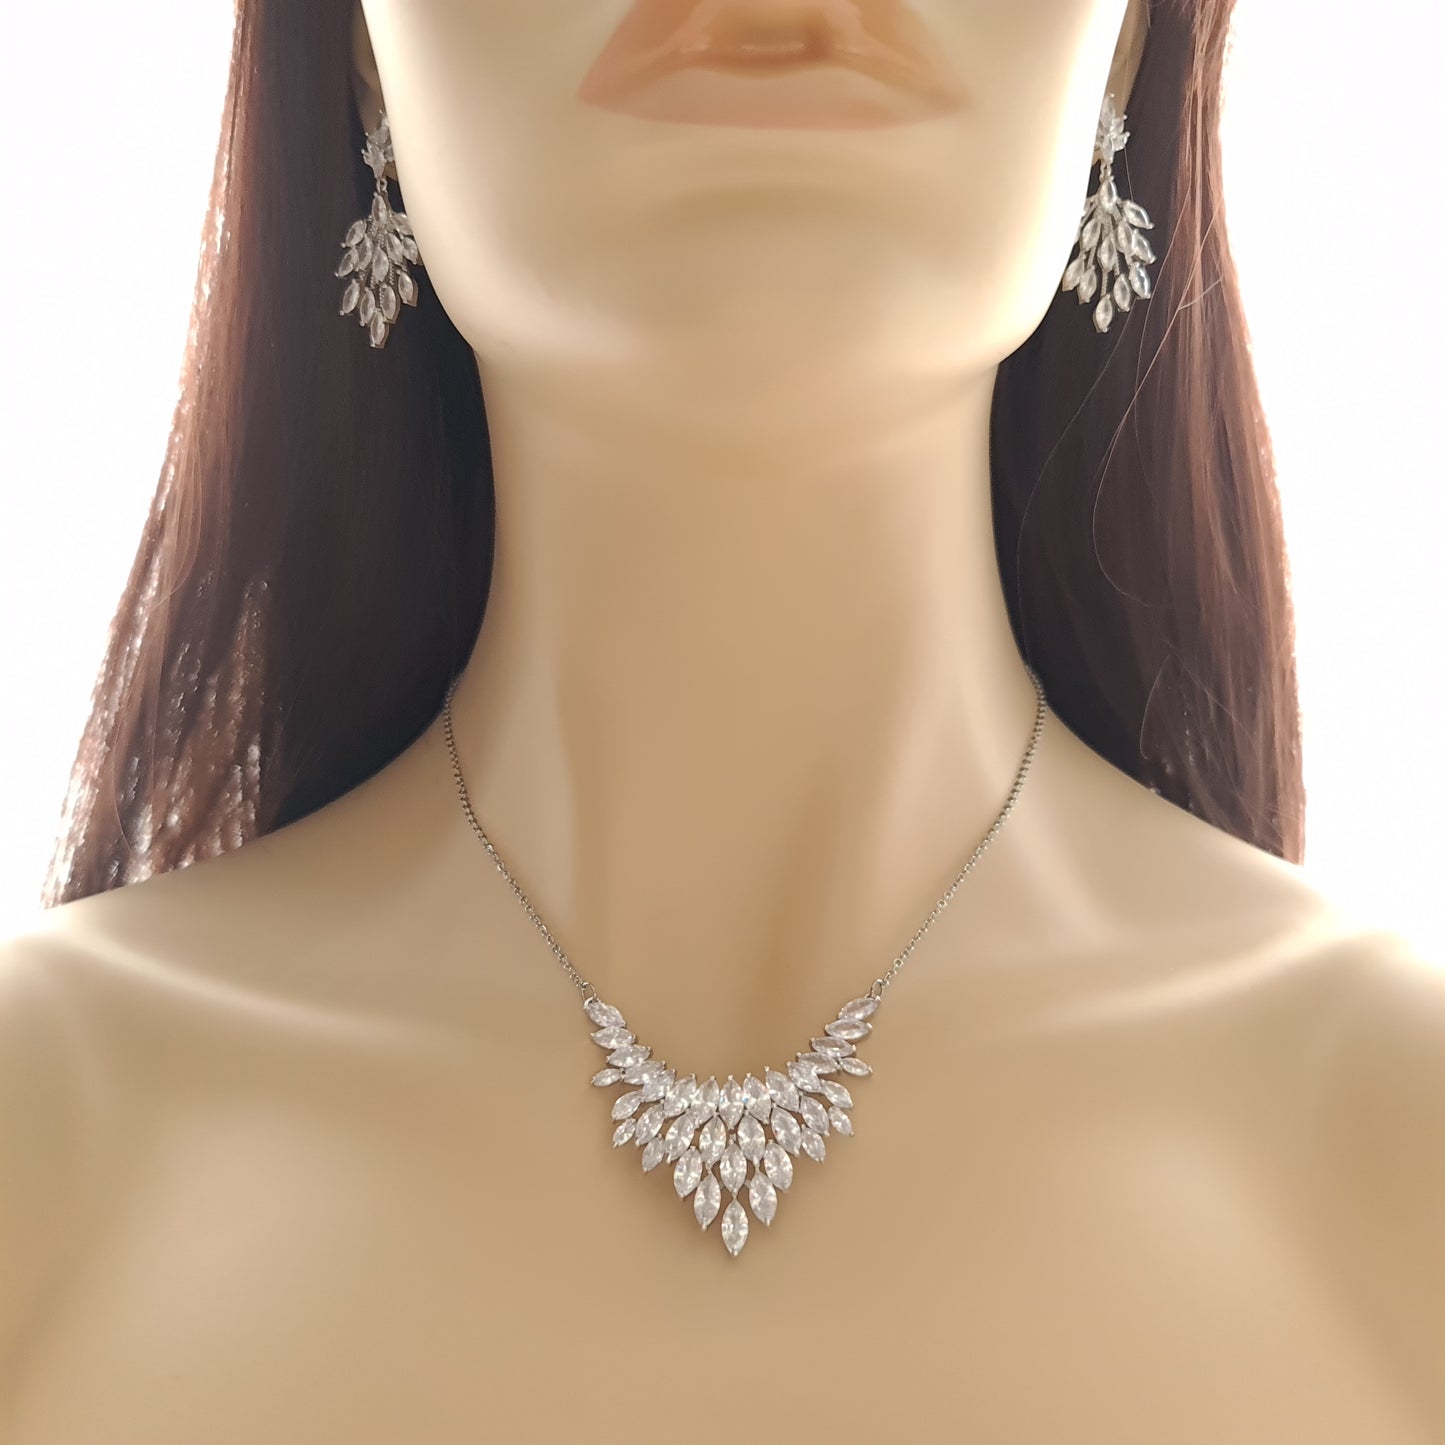 Necklace for Wedding with Cluster of Tiny Leaves-Belle